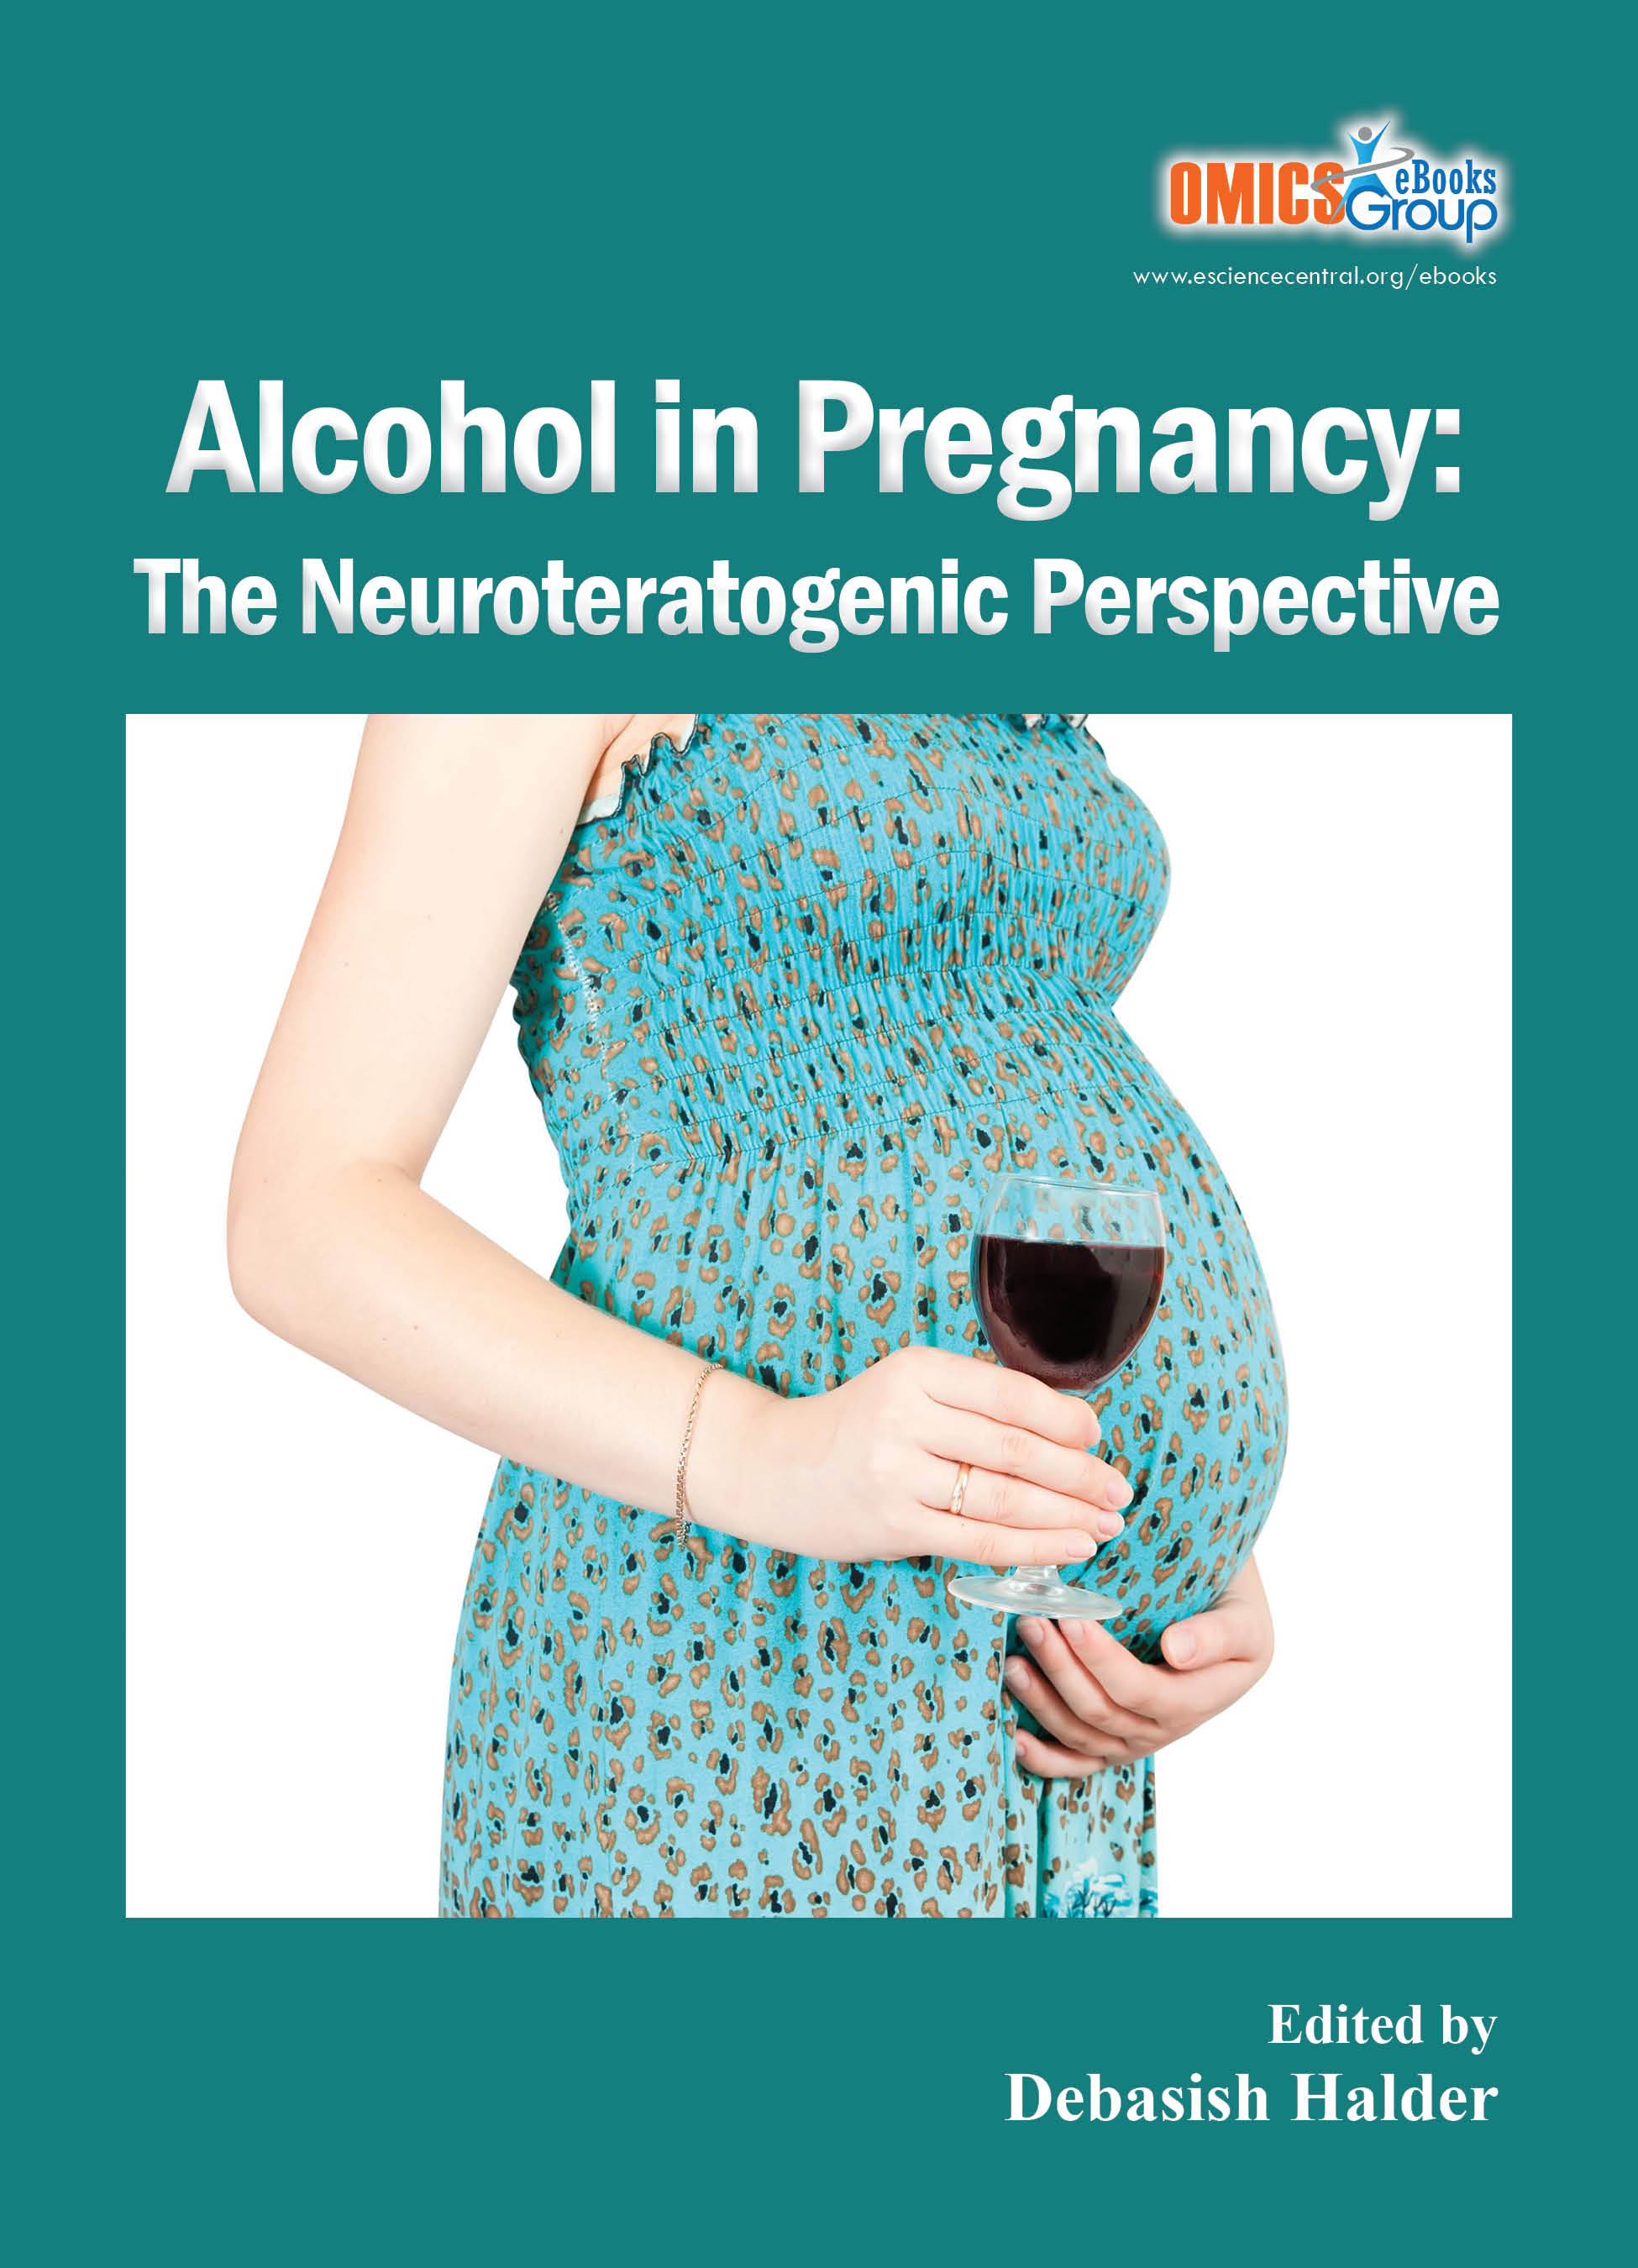 Alcohol in pregnancy: The neuroteratogenic perspective